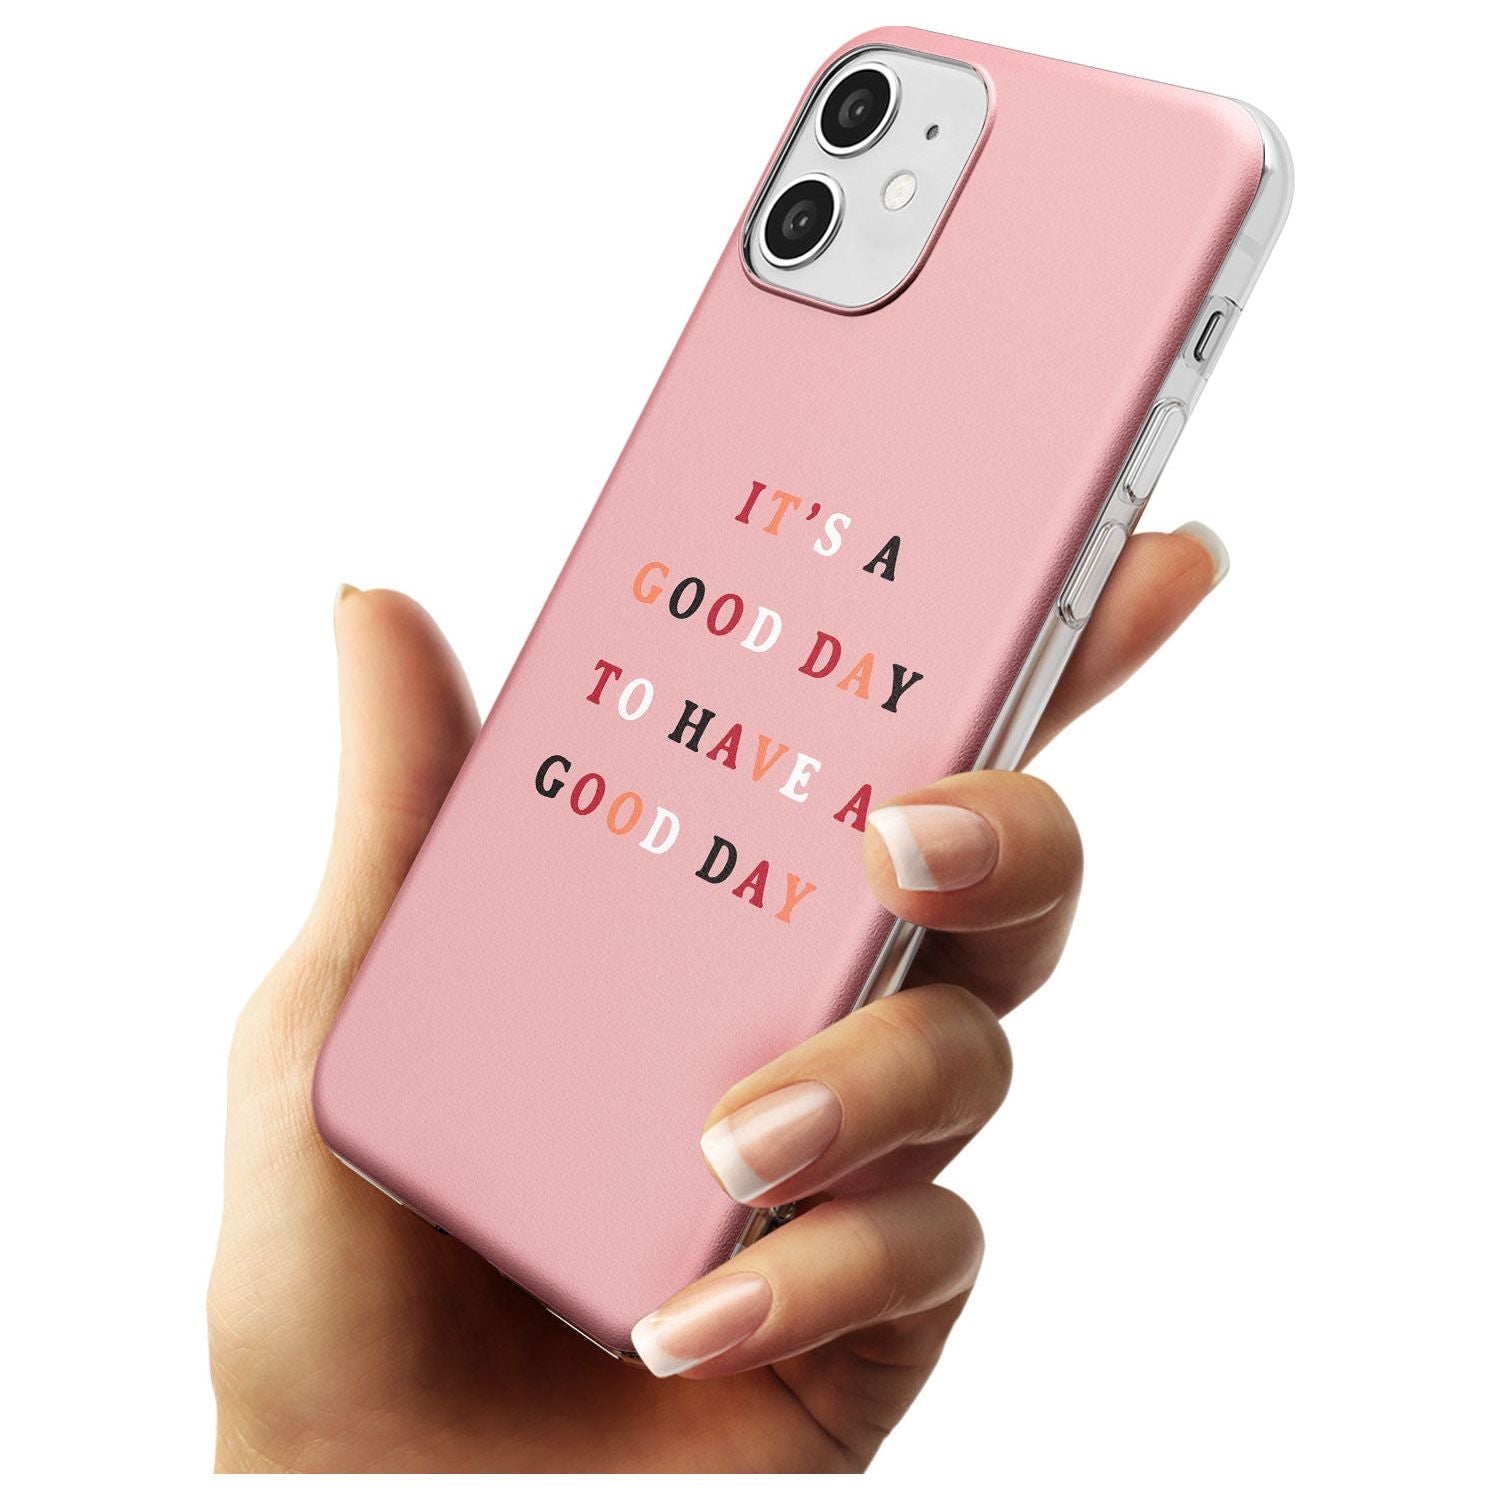 It's a good day to have a good day Slim TPU Phone Case for iPhone 11